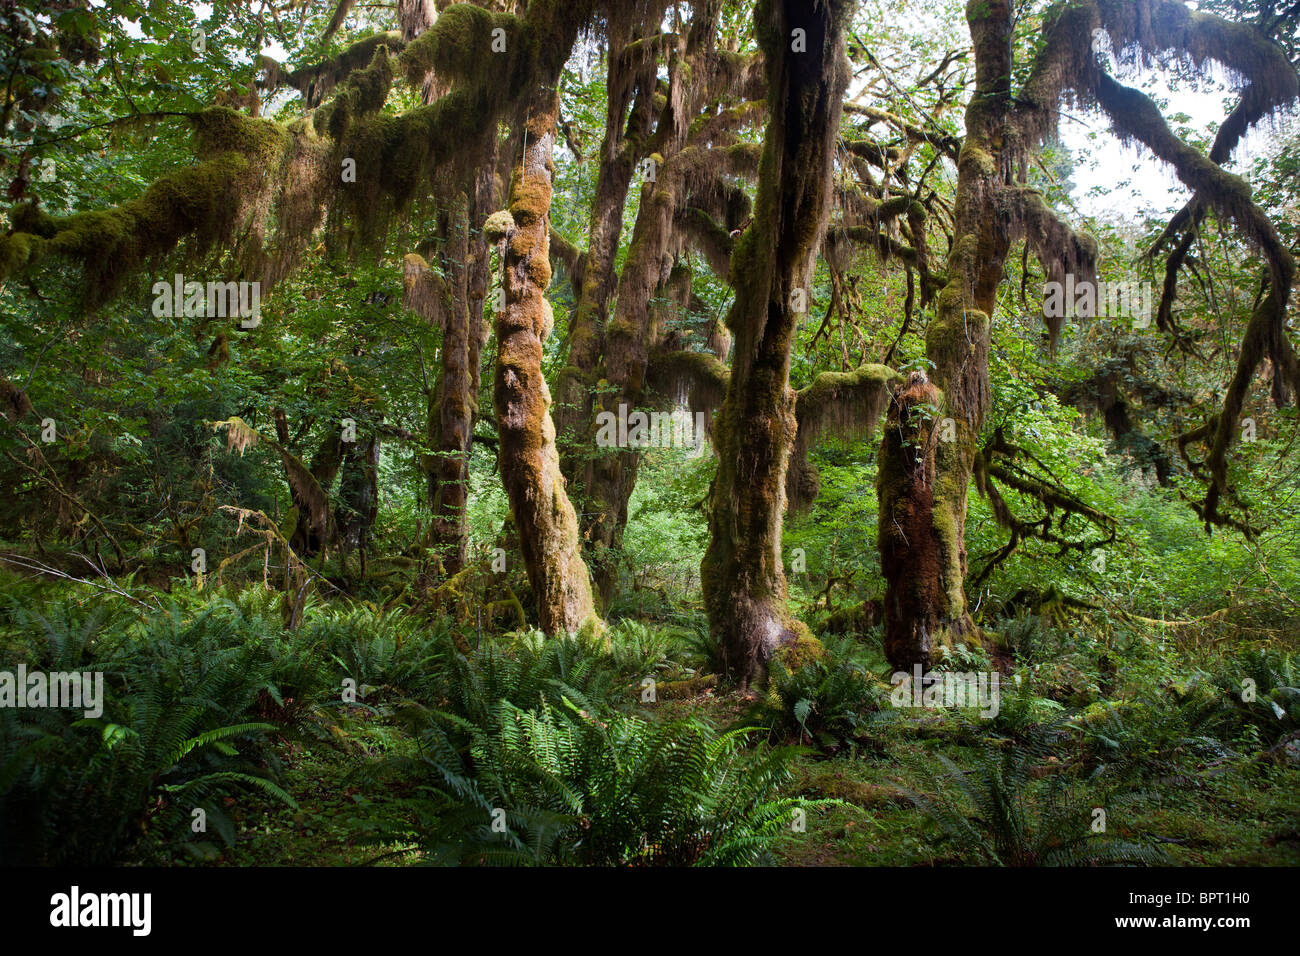 Moss hangs from maple trees, Hall of Mosses trail, Hoh Rain Forest, Olympic National Park, Washington, United States of America Stock Photo